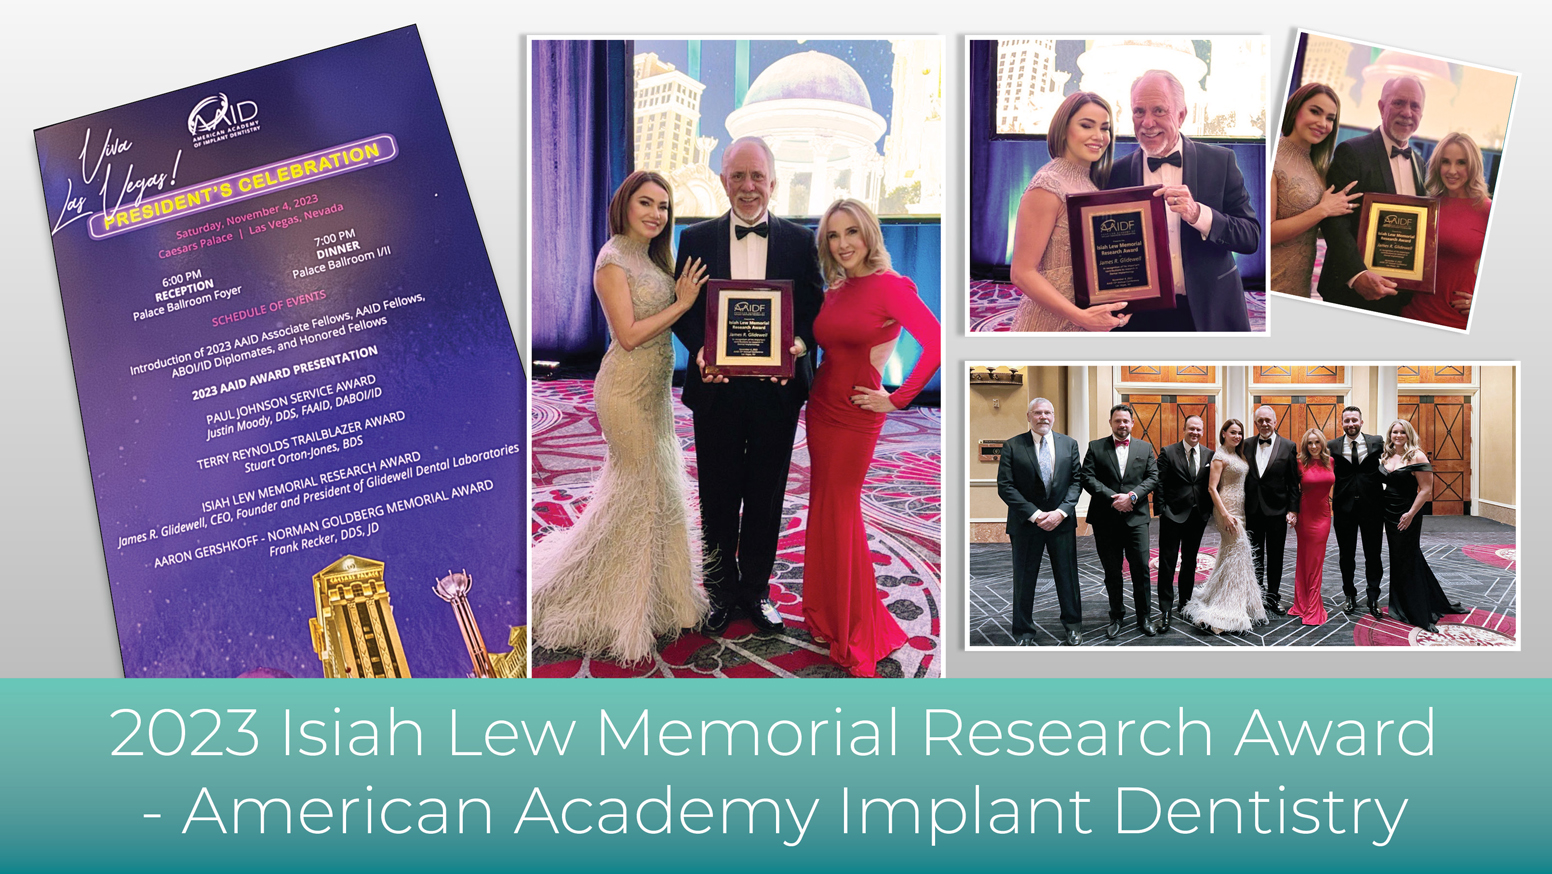 The Isiah Lew Research Award and Our Role in the Future of Dentistry